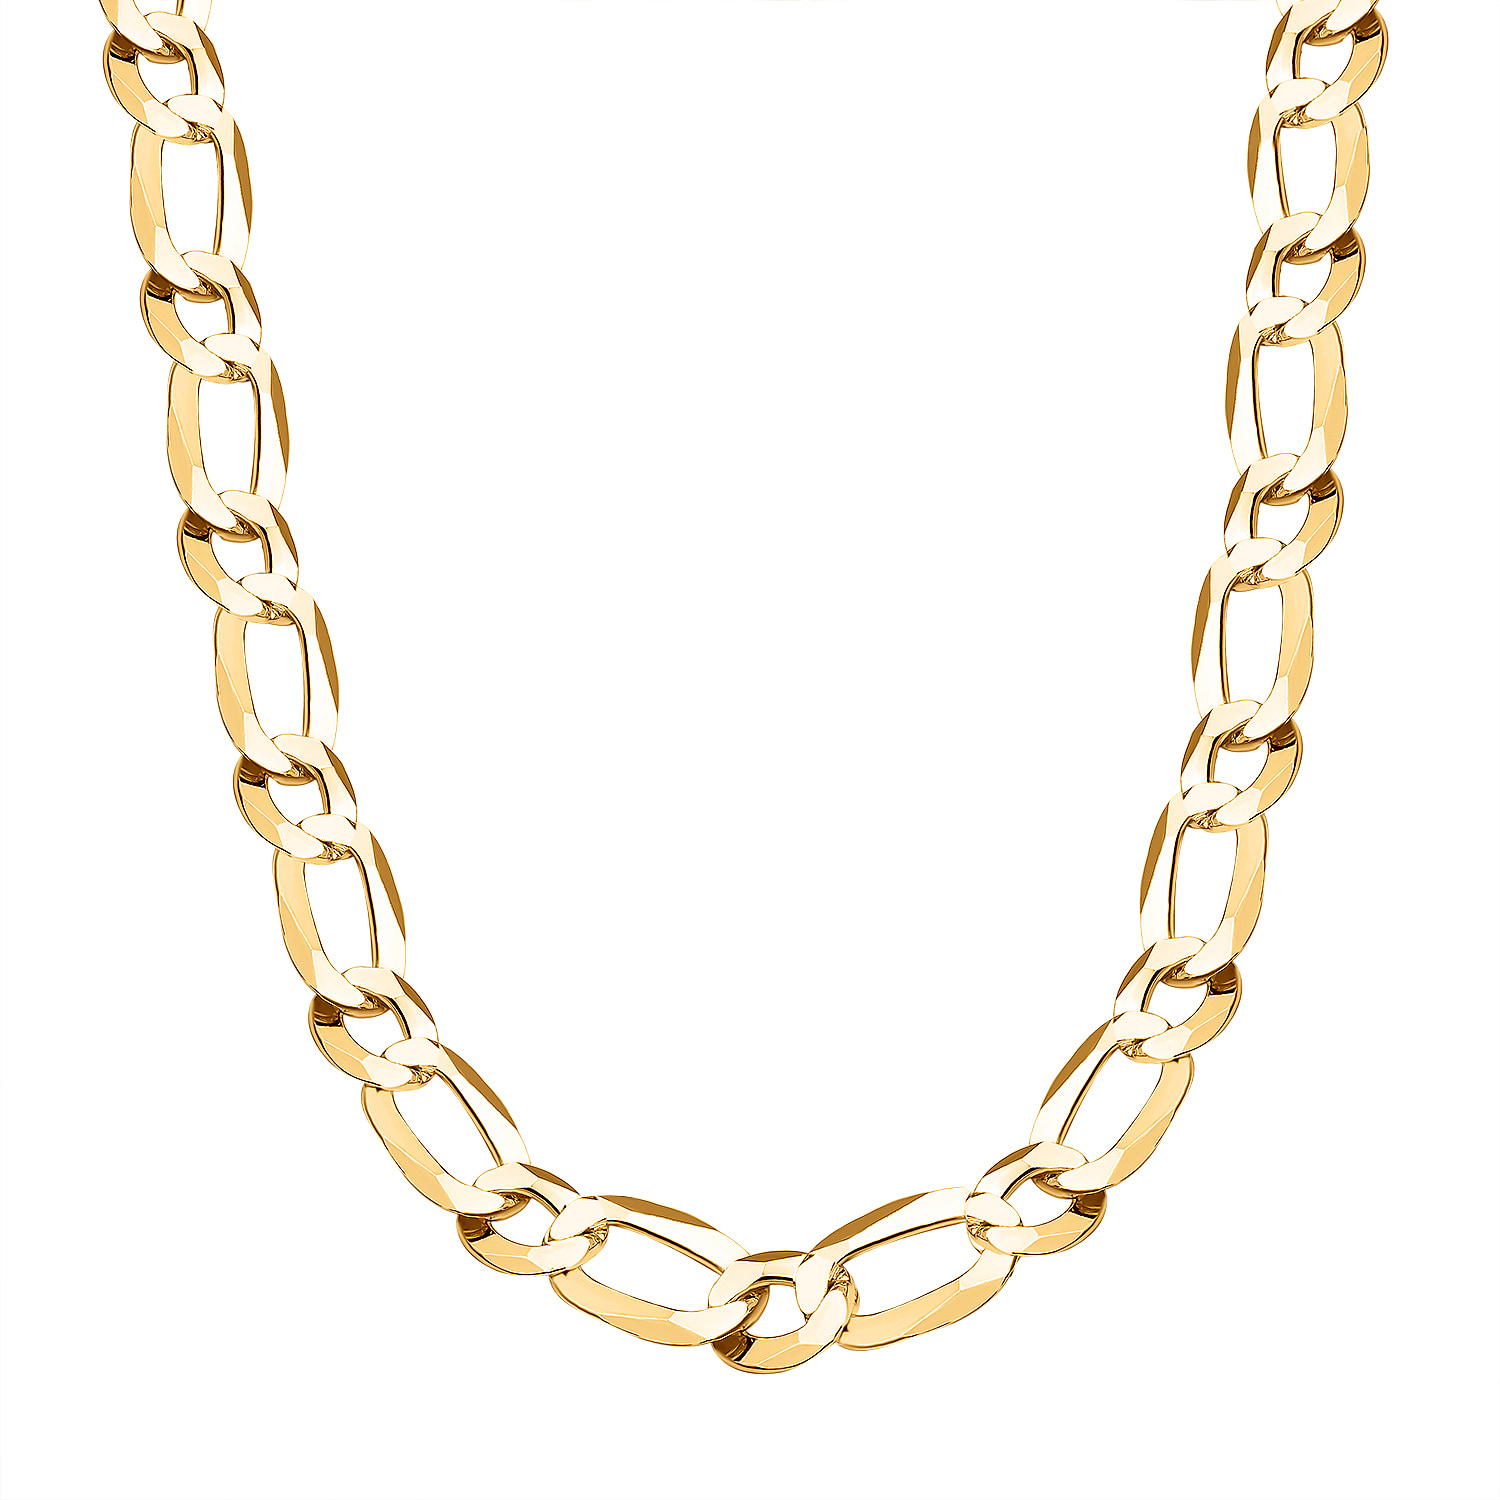 Italian Made - Gold Overlay Sterling Silver Figaro Necklace (Size - 20), Silver Wt. 24.20 Gms